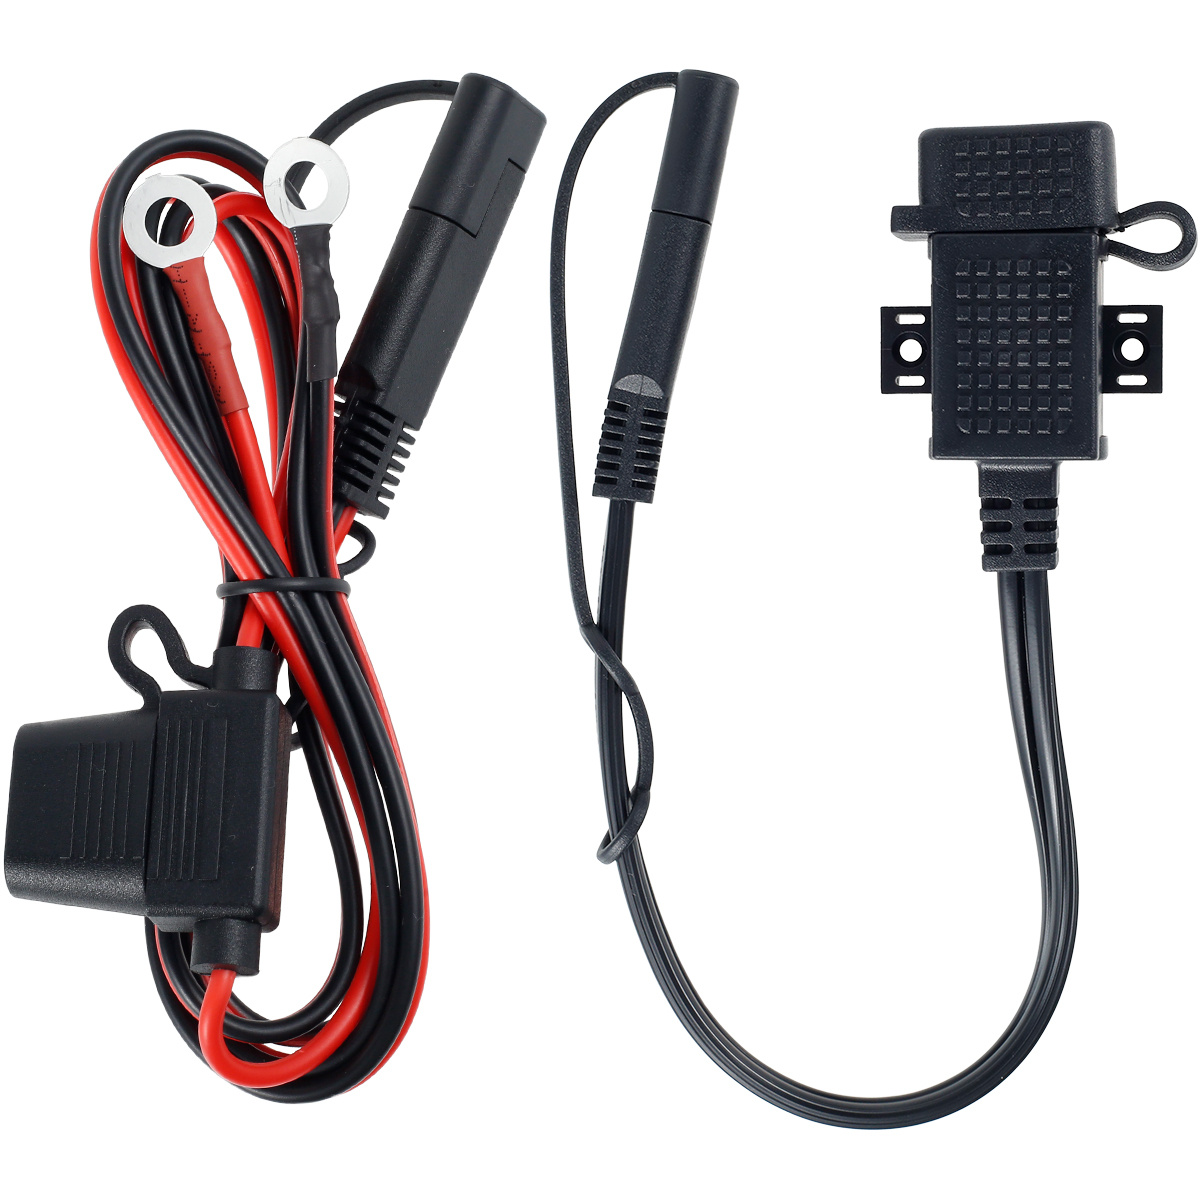 Waterproof Motorcycle SAE to USB Charger Adapter Cable Inline Fuse Phone  GPS US